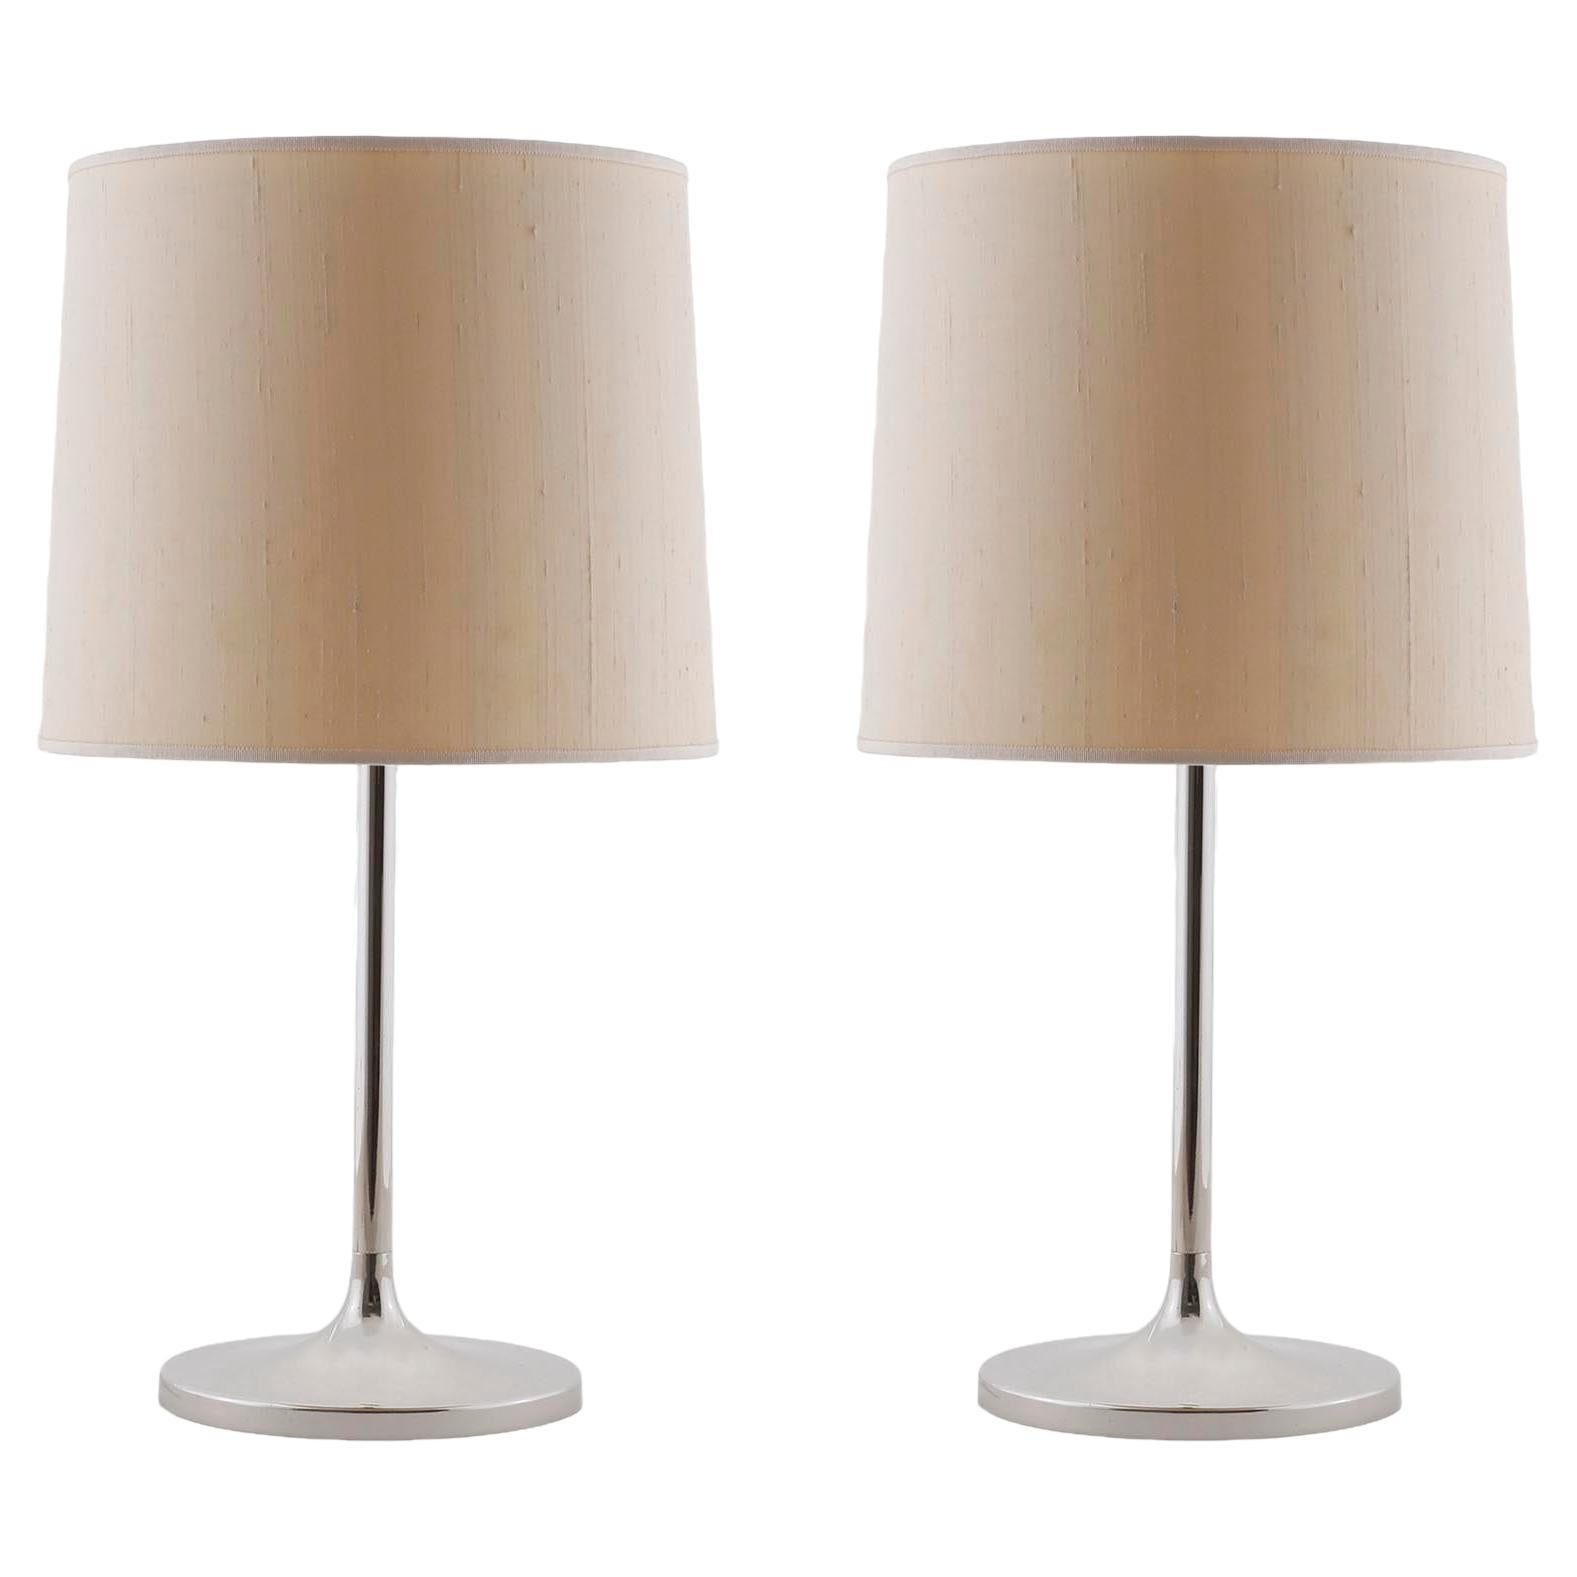 Pair of Kalmar Table Lamps with Tulip Base, Polished Nickel, Beige Shade, 1970